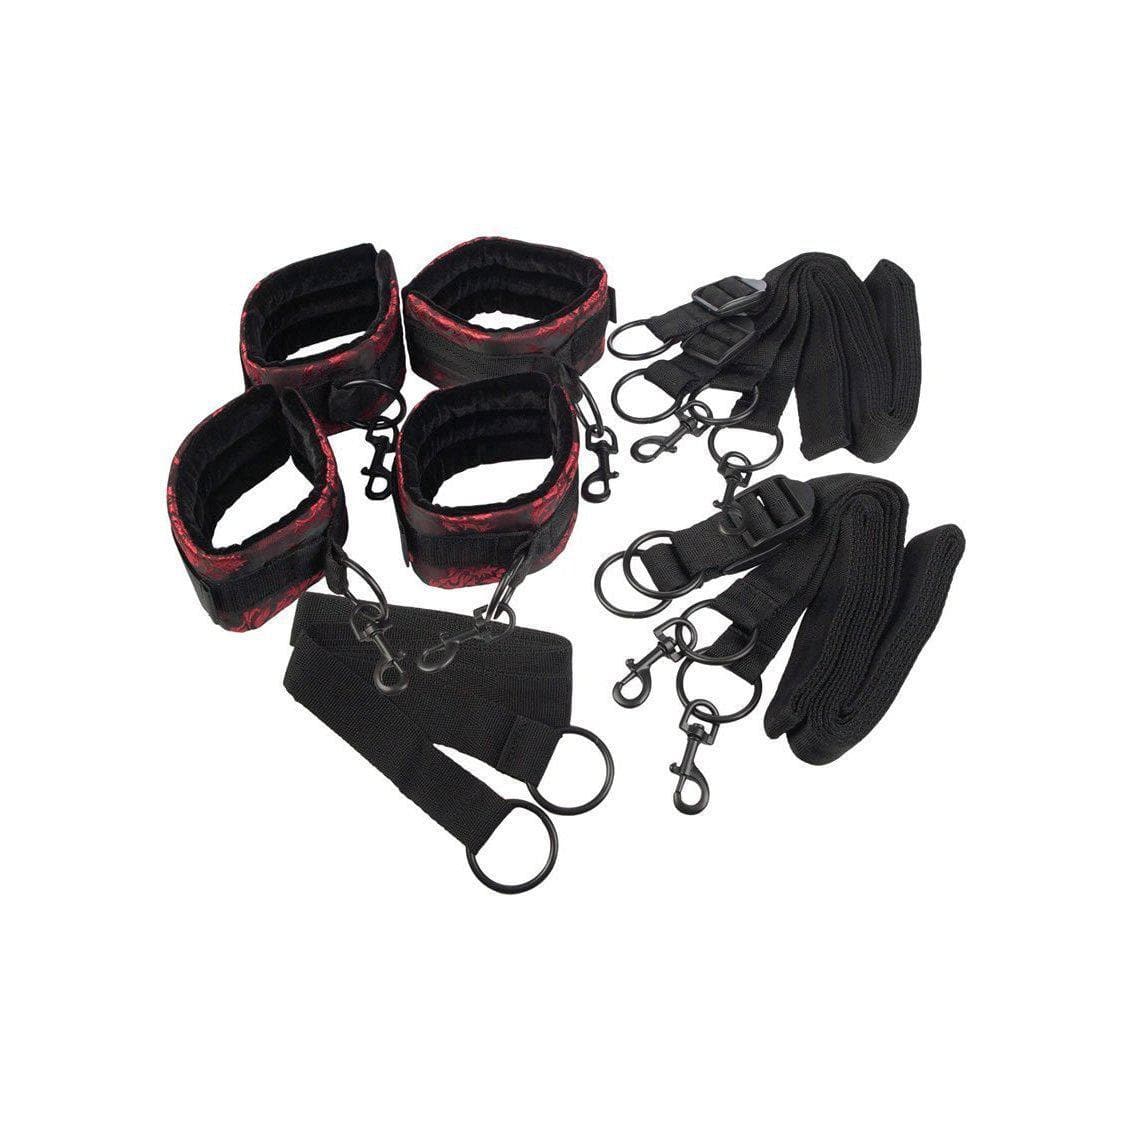 https://romanticblessings.com/cdn/shop/products/Scandal-Couples-Role-Play-Adjustable-Bed-Restraints-On-The-Wilder-Side_74867c72-c3d2-44ca-b5e7-1adf574206e2.jpg?v=1670028946